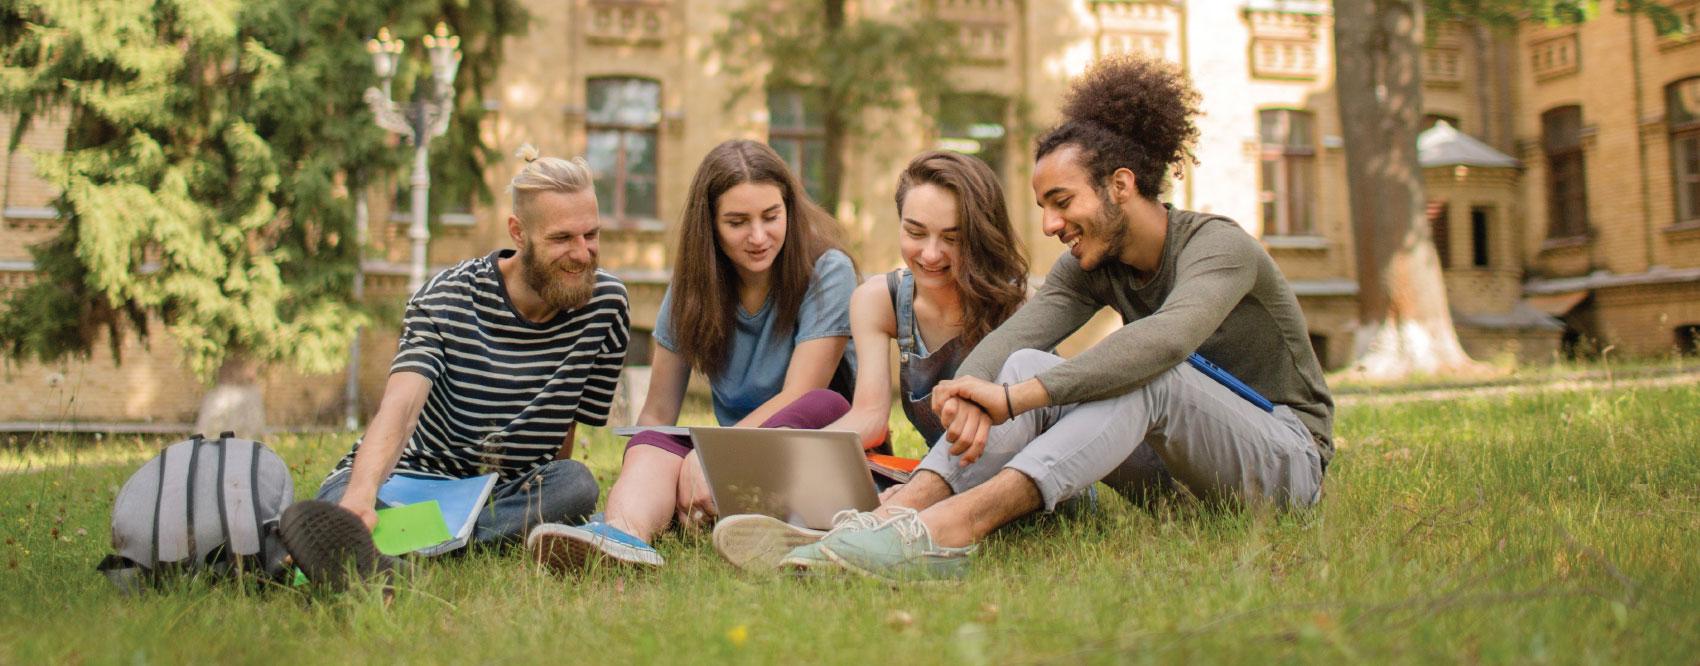 college students outside smiling sitting in the grass